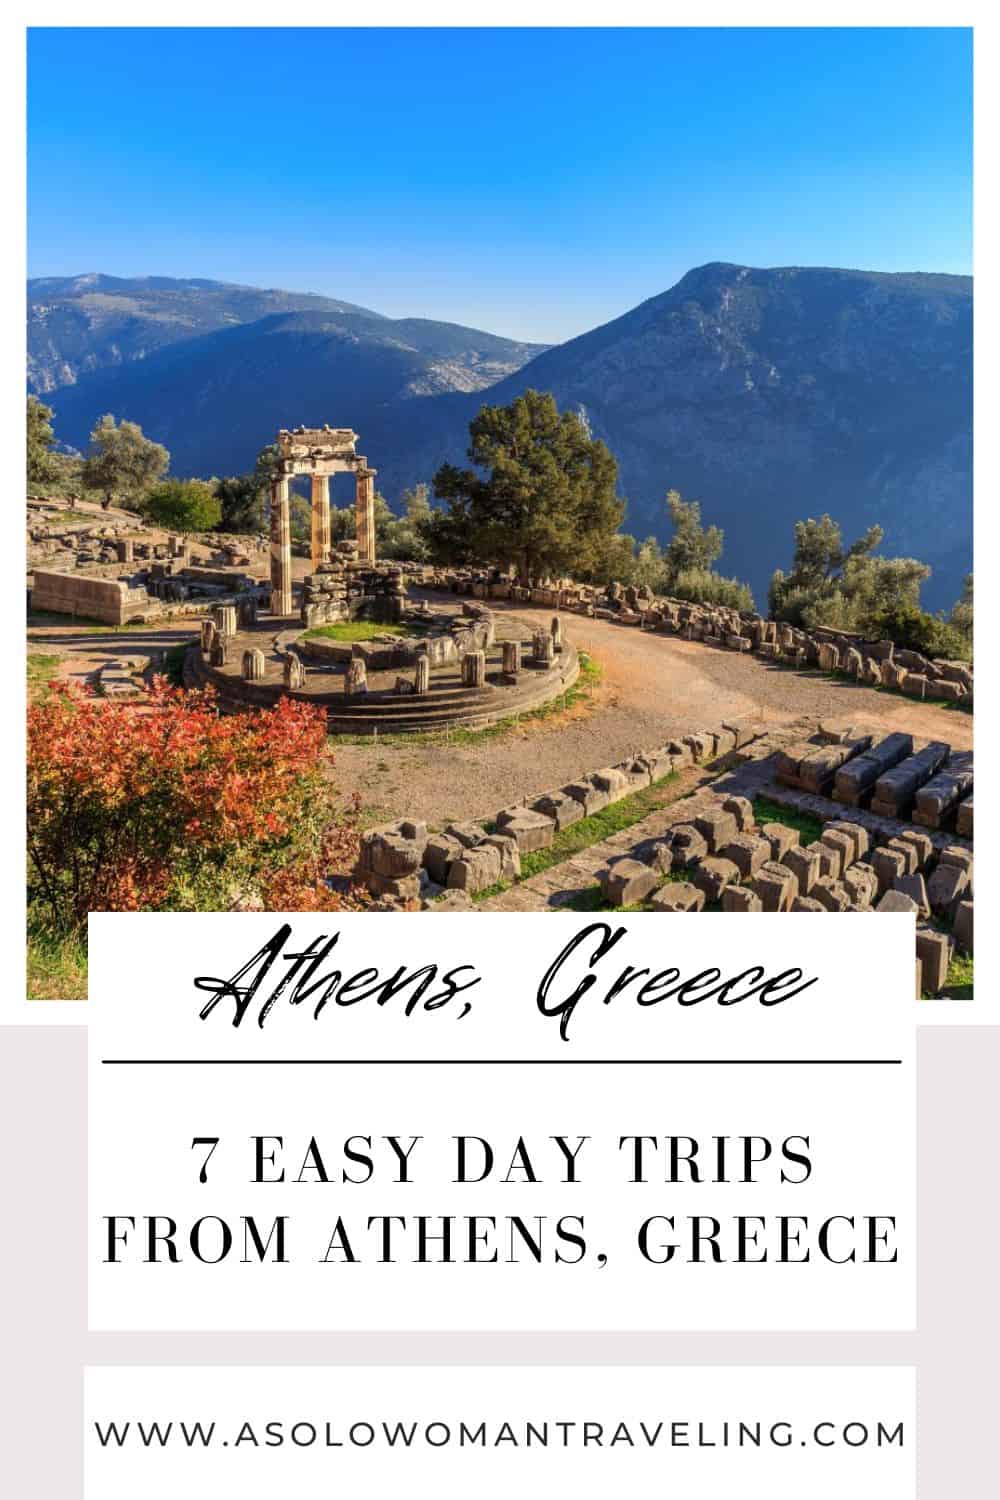 7 Easy Day Trips from Athens Greece!